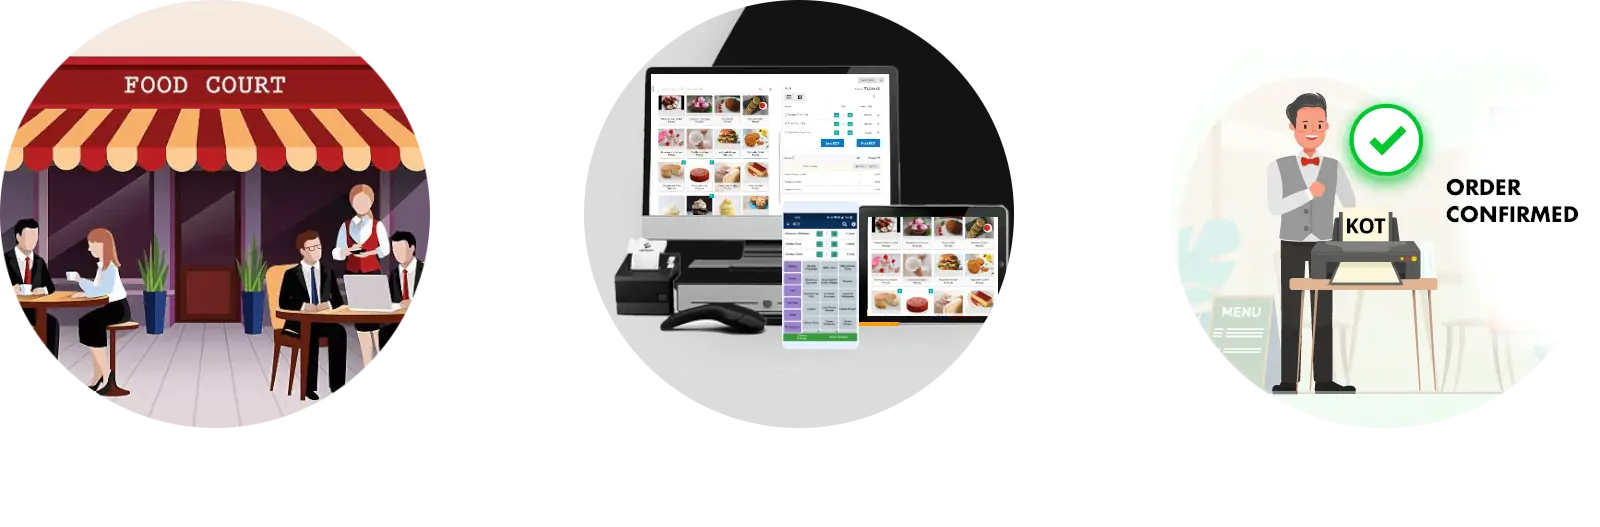 Output Books -  POS Software For Restaurants with Billing & KOT